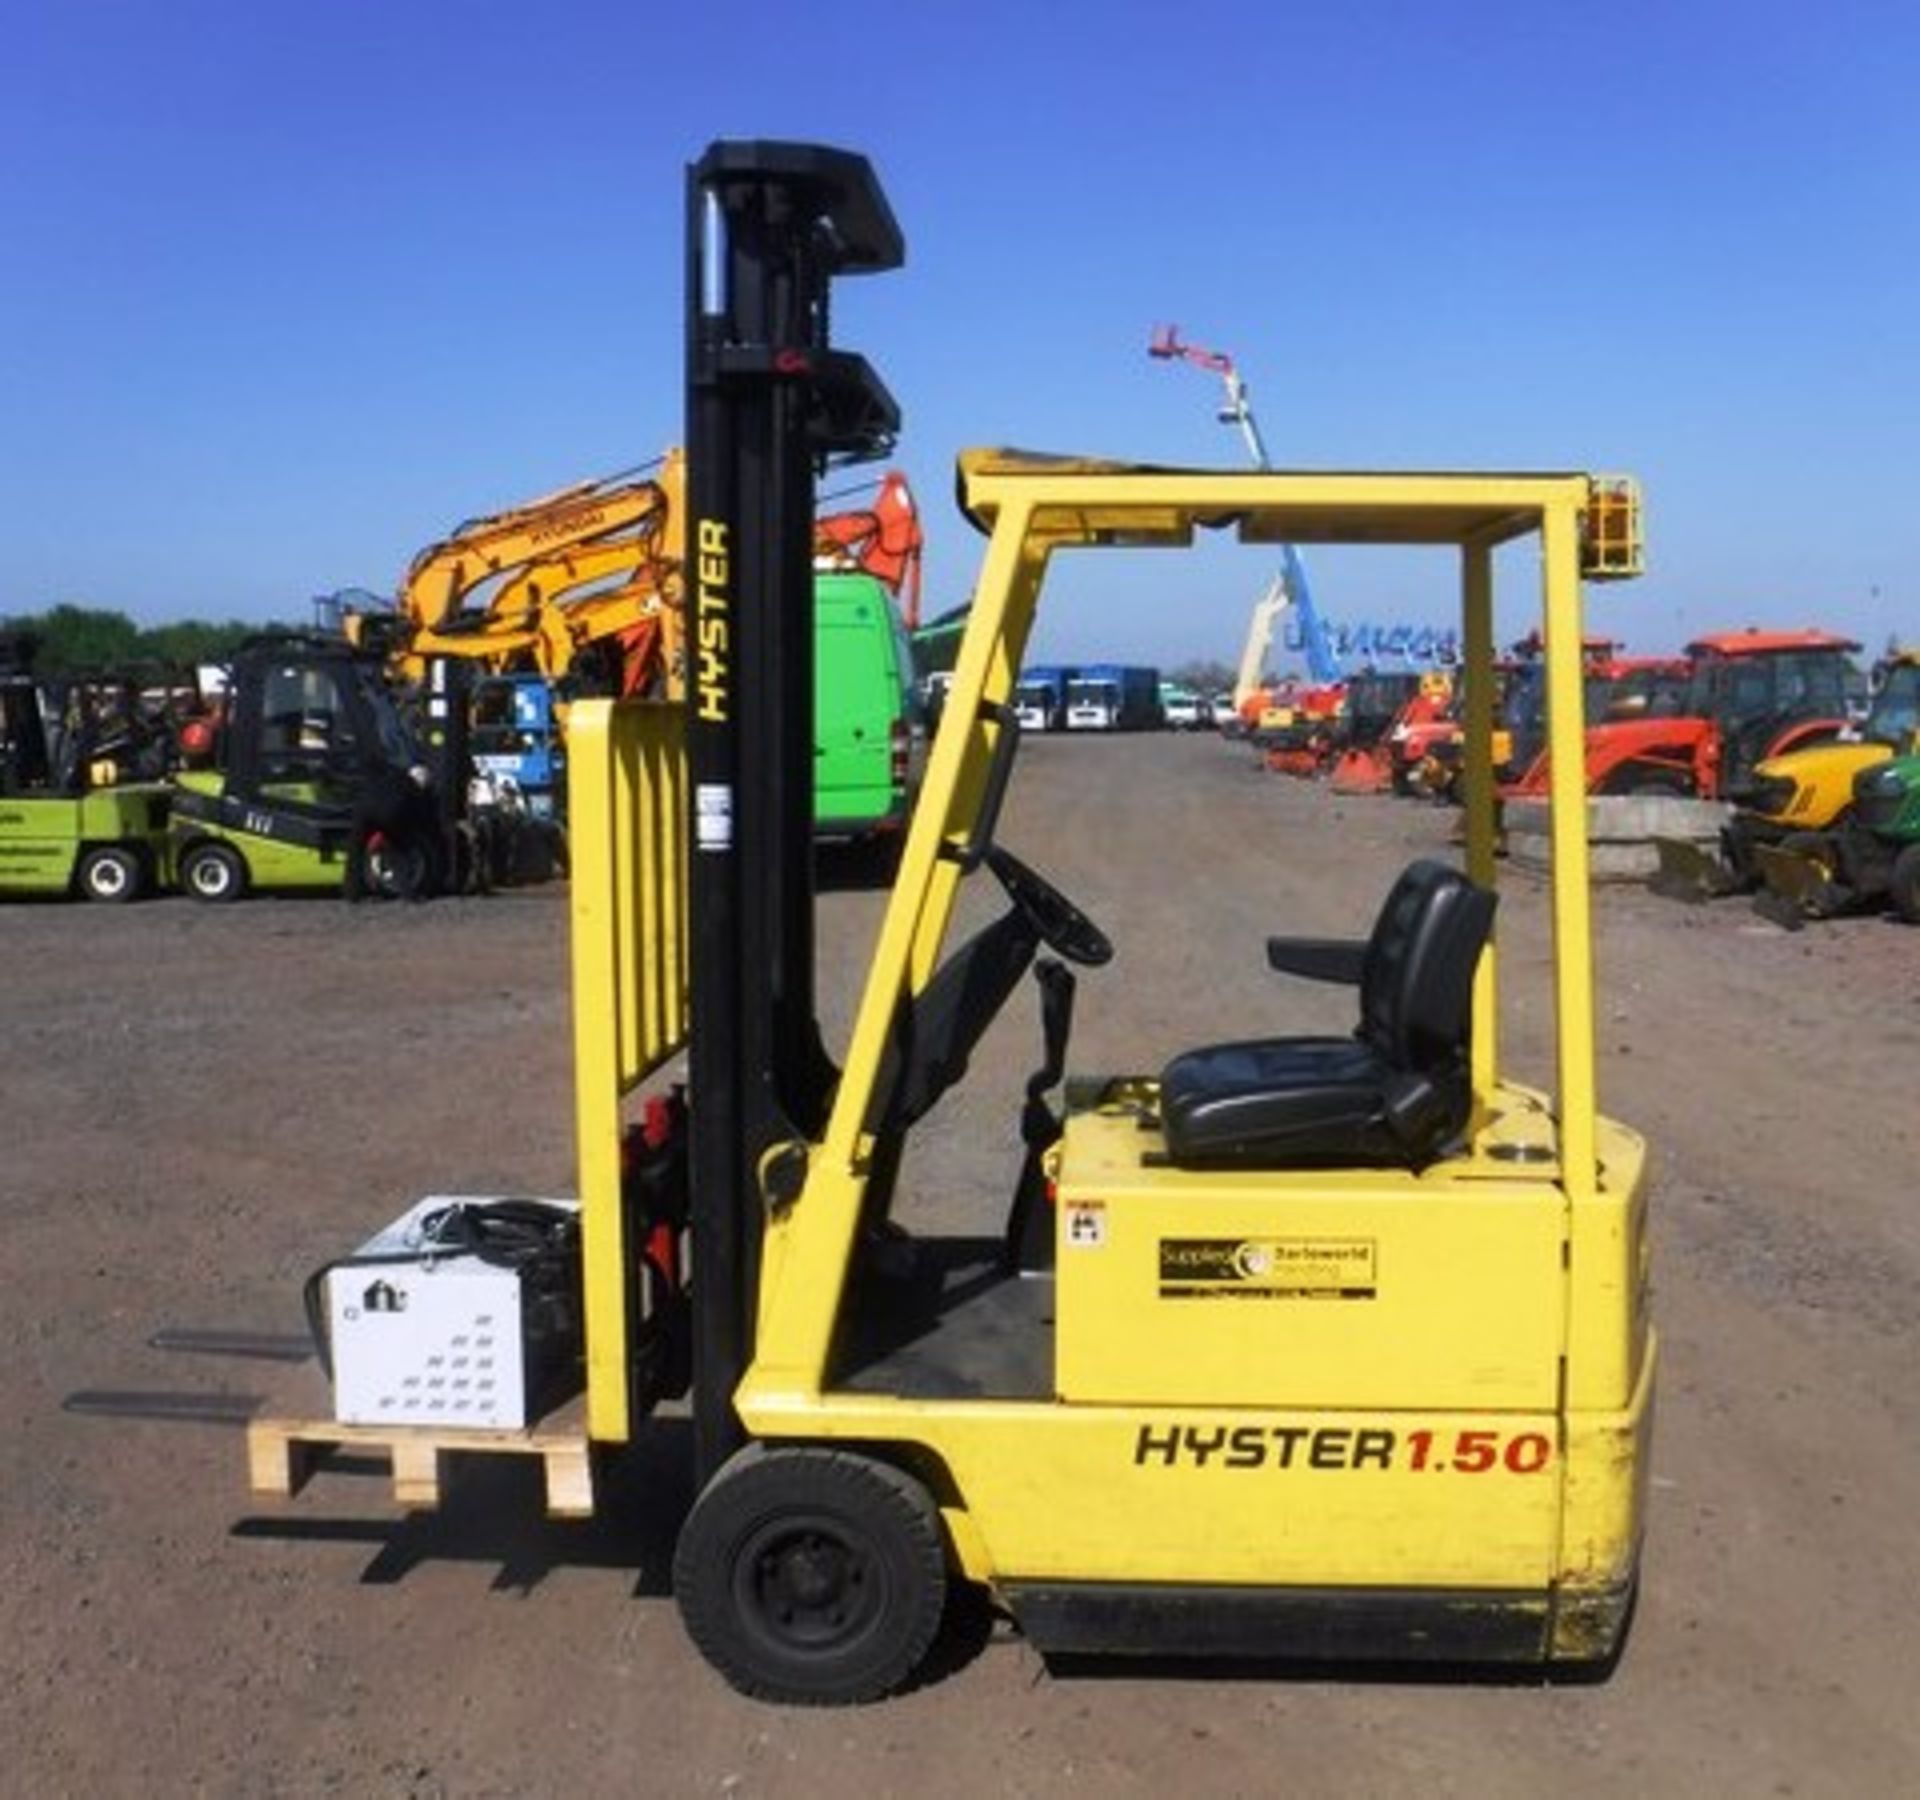 2011 HYSTER forklift A 1.50XL, s/n - C203B01762J, Max Reach - 3800mm, 402hrs (not verified) - Image 2 of 13